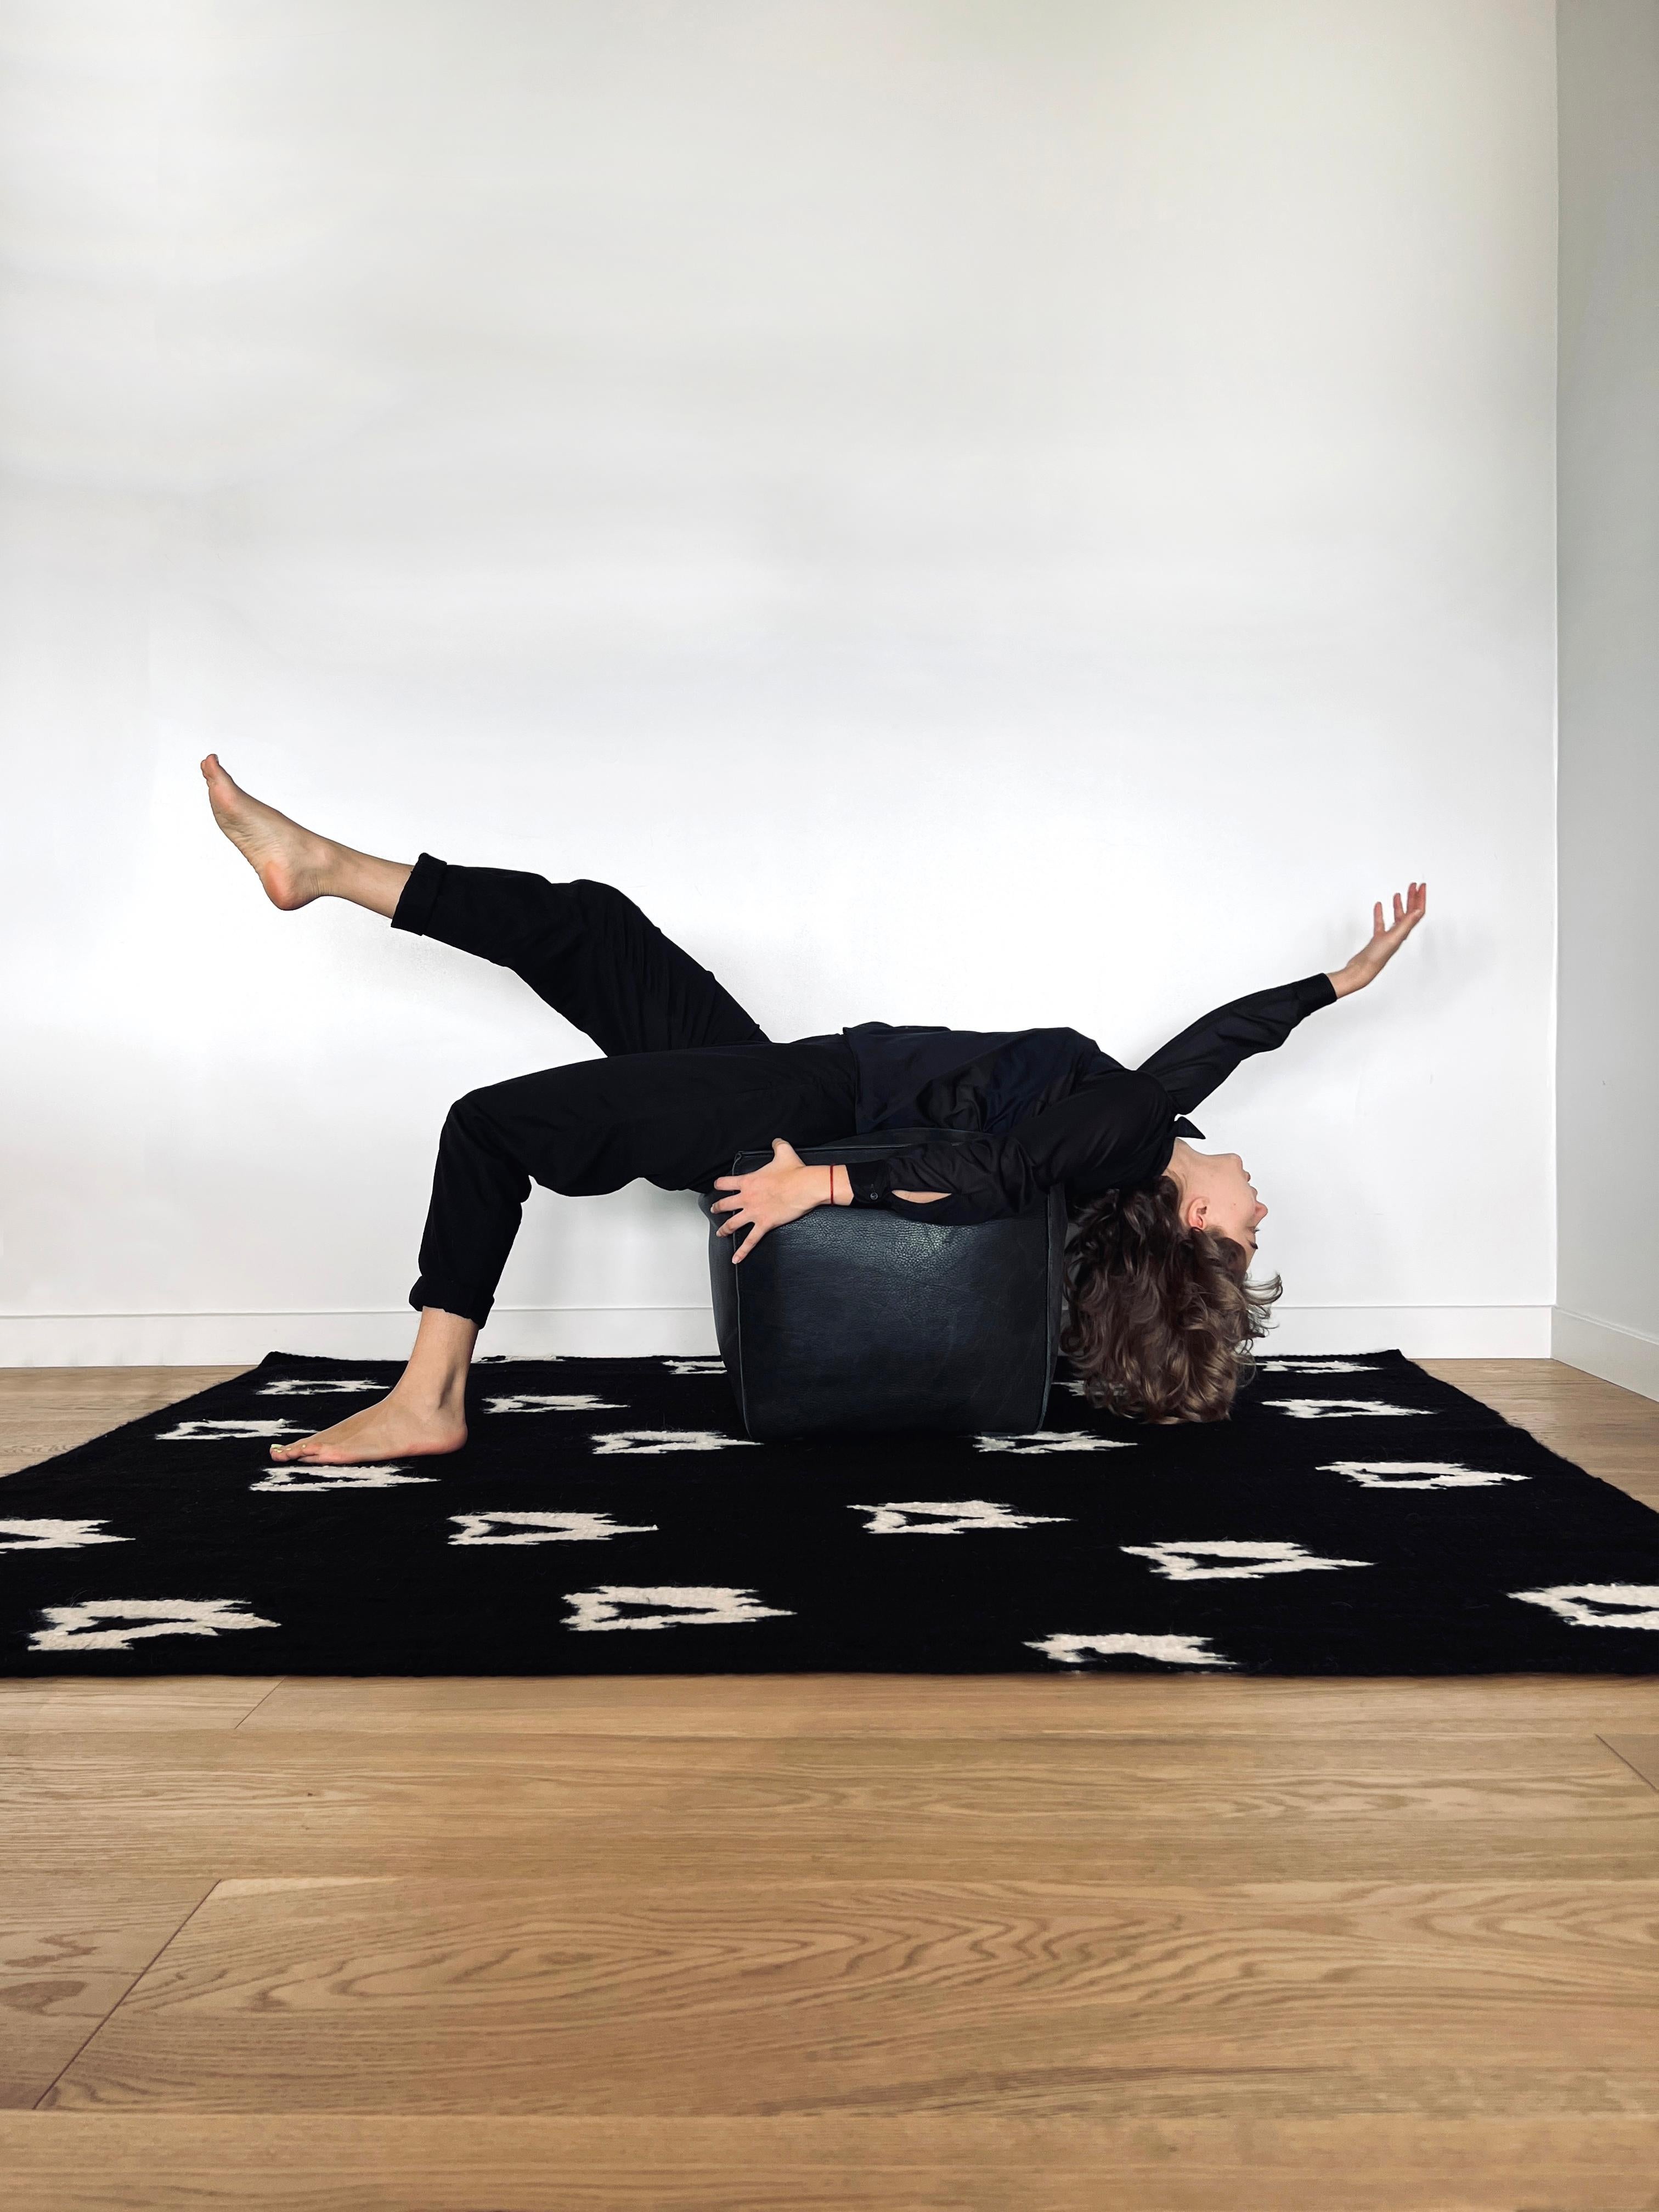 Adapted from the original artwork by Juan Stoppani & Jean-Yves Legavre, Tombé du ciel, 2020.

LALANA RUGS is an applied arts initiative born from the desire to combine proposals by contemporary artists with traditional local techniques and noble